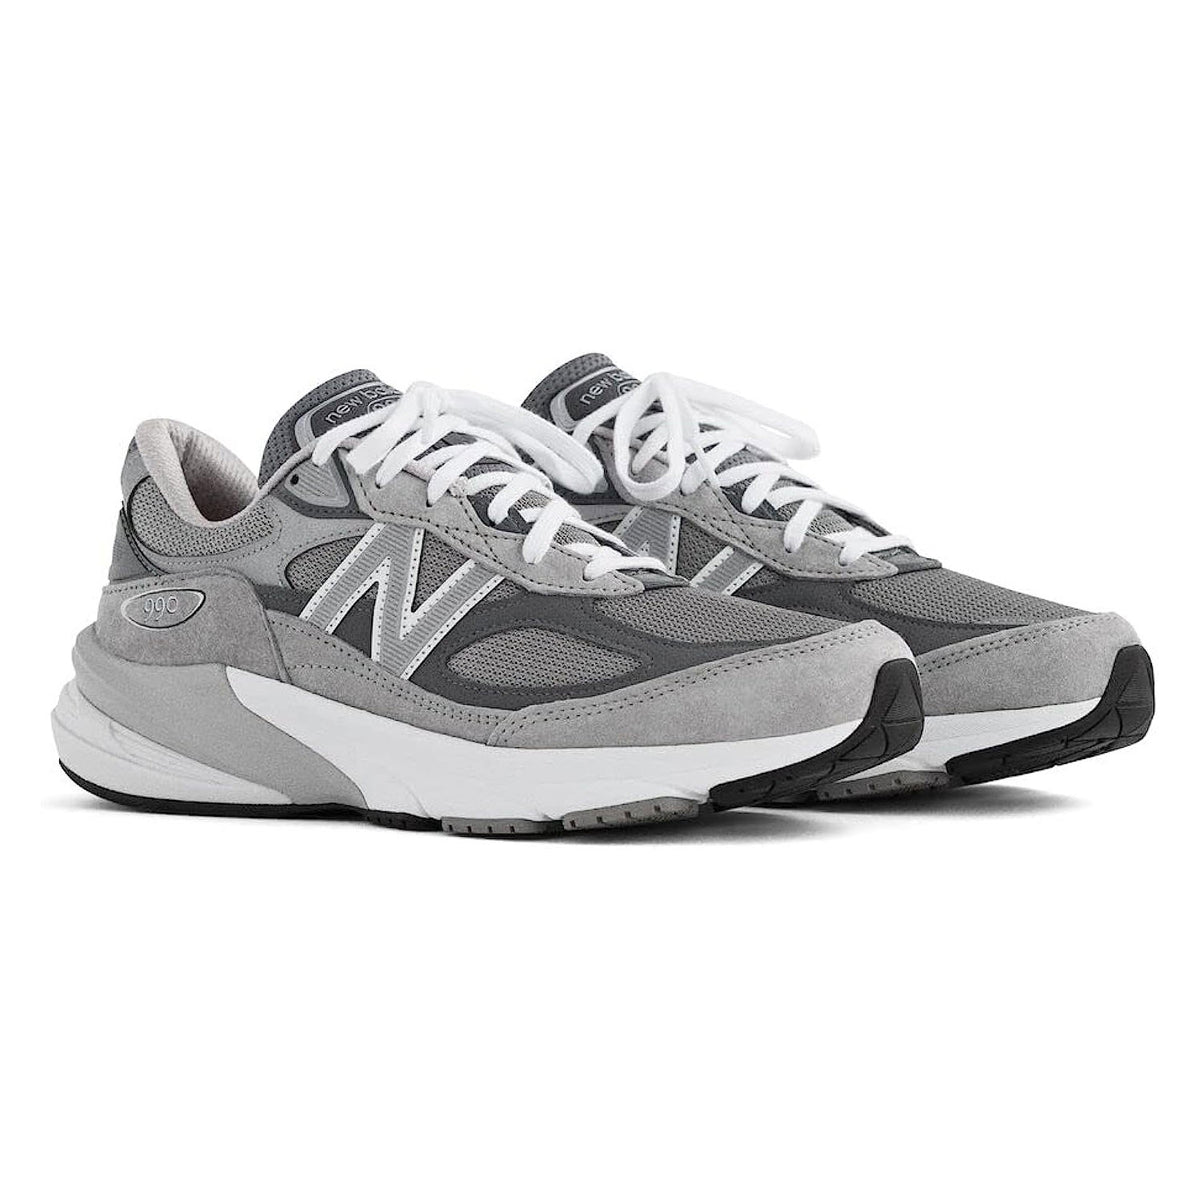 A pair of NEW BALANCE 990 V6 GREY - MENS sneakers in gray, showcasing a prominent &quot;N&quot; logo and ENCAP midsole cushioning, displayed side by side on a white background.